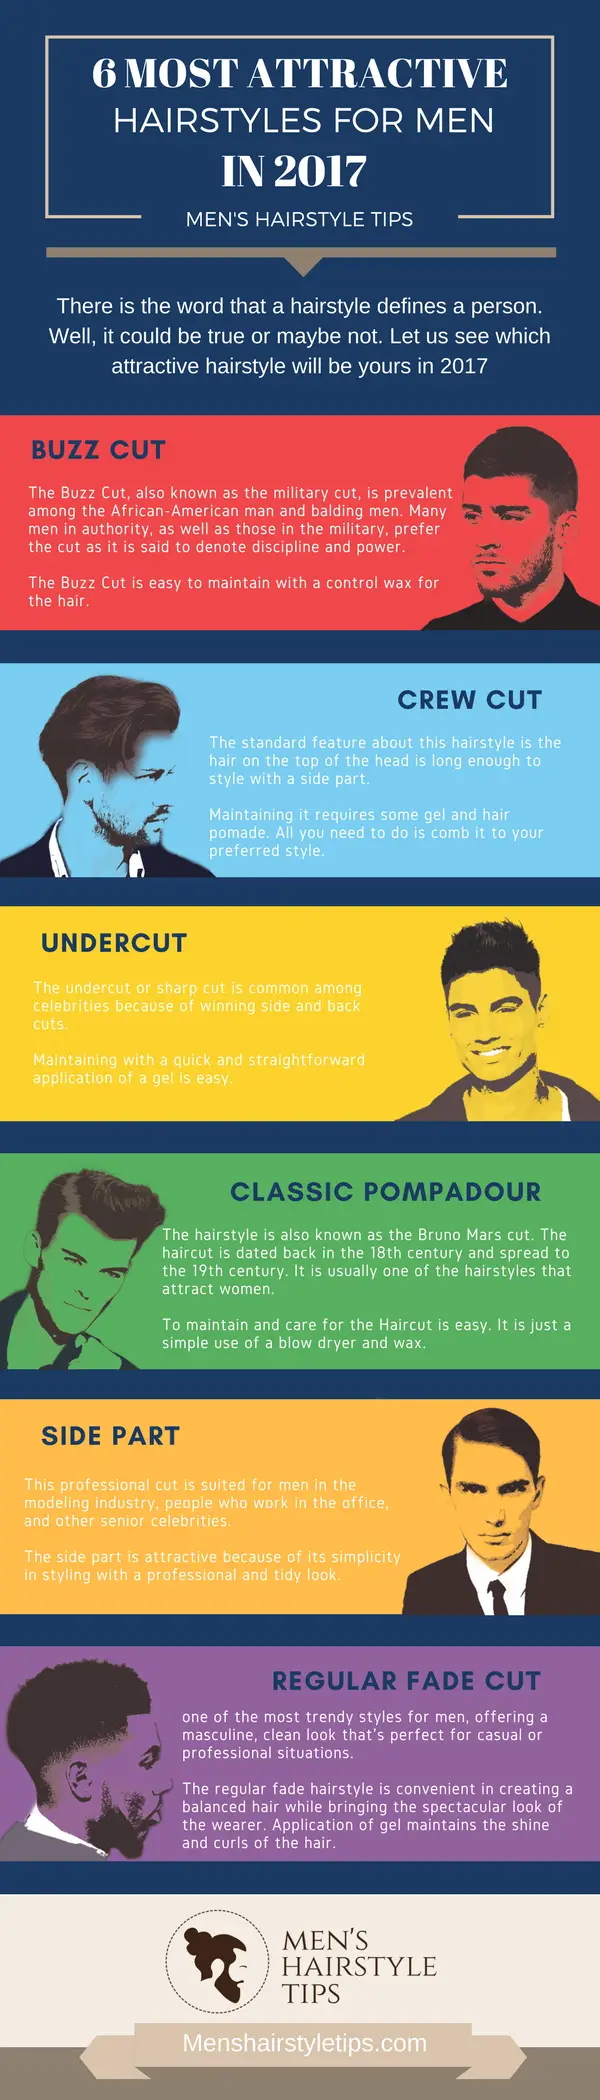 6 Most Attractive Hairstyles For Men In 2017